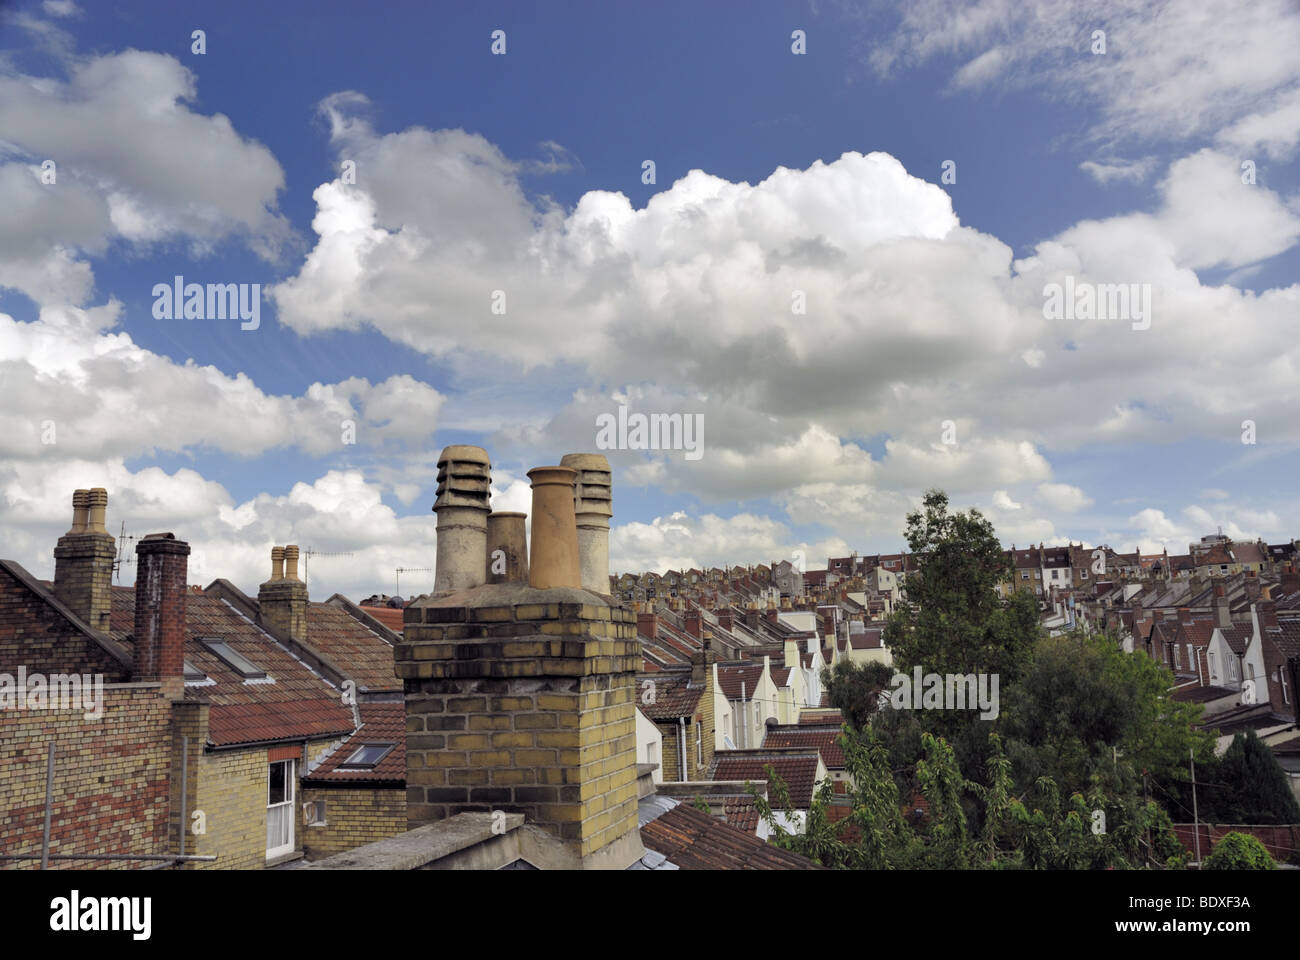 Rooftop view of Terraced housing and chimney pots with a blue sky and fluffy white clouds. Stock Photo